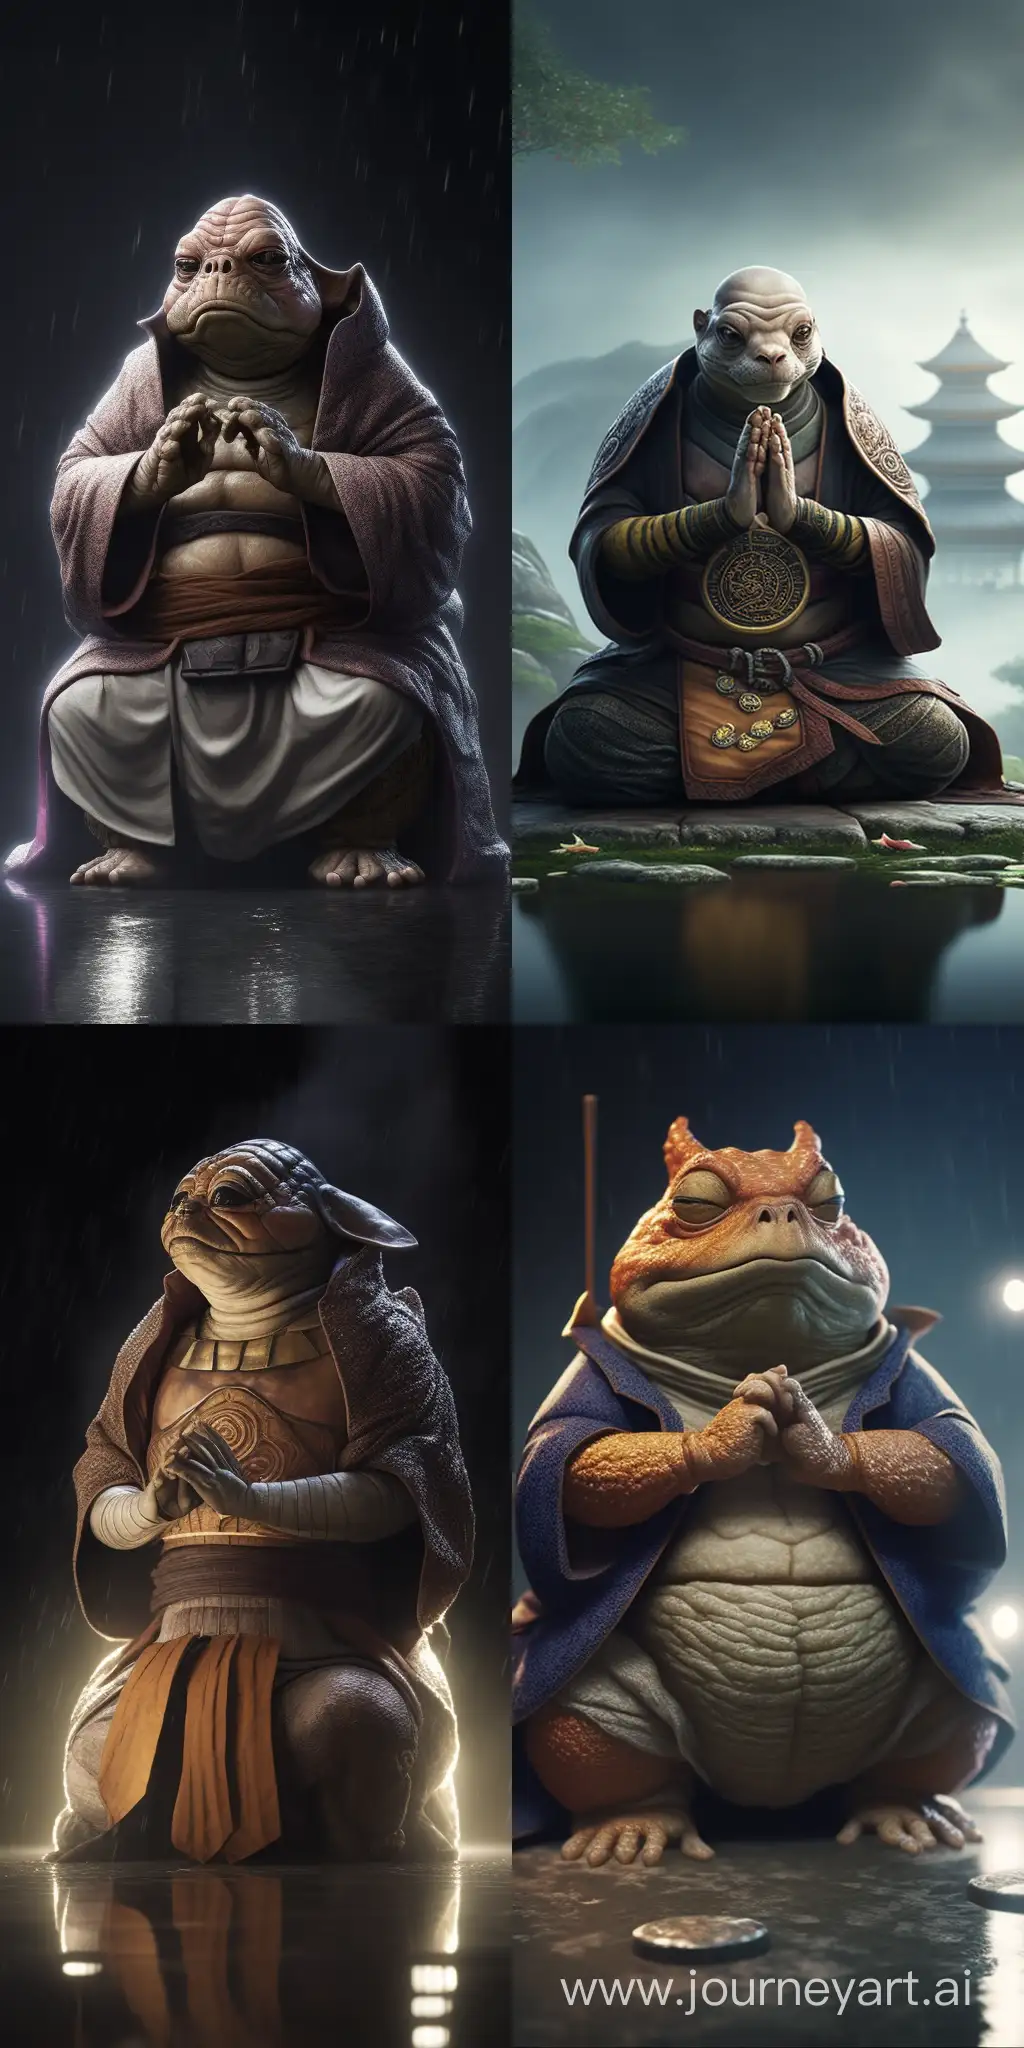 Hyper detailed anthropomorphic wise kung fu master oogway in glittering robes prays in lotus pose,holding his stafe of wisdom showing his shturtle shell, hyper-realistic and hyper-detailed, in the rain, stunning composition, hyper-emotional, epic cinematic lighting, 8k resolution, shot on Hasselblad H6D-400c Multi-shot --ar 1:2 --q 2 --v 4 --chaos 100